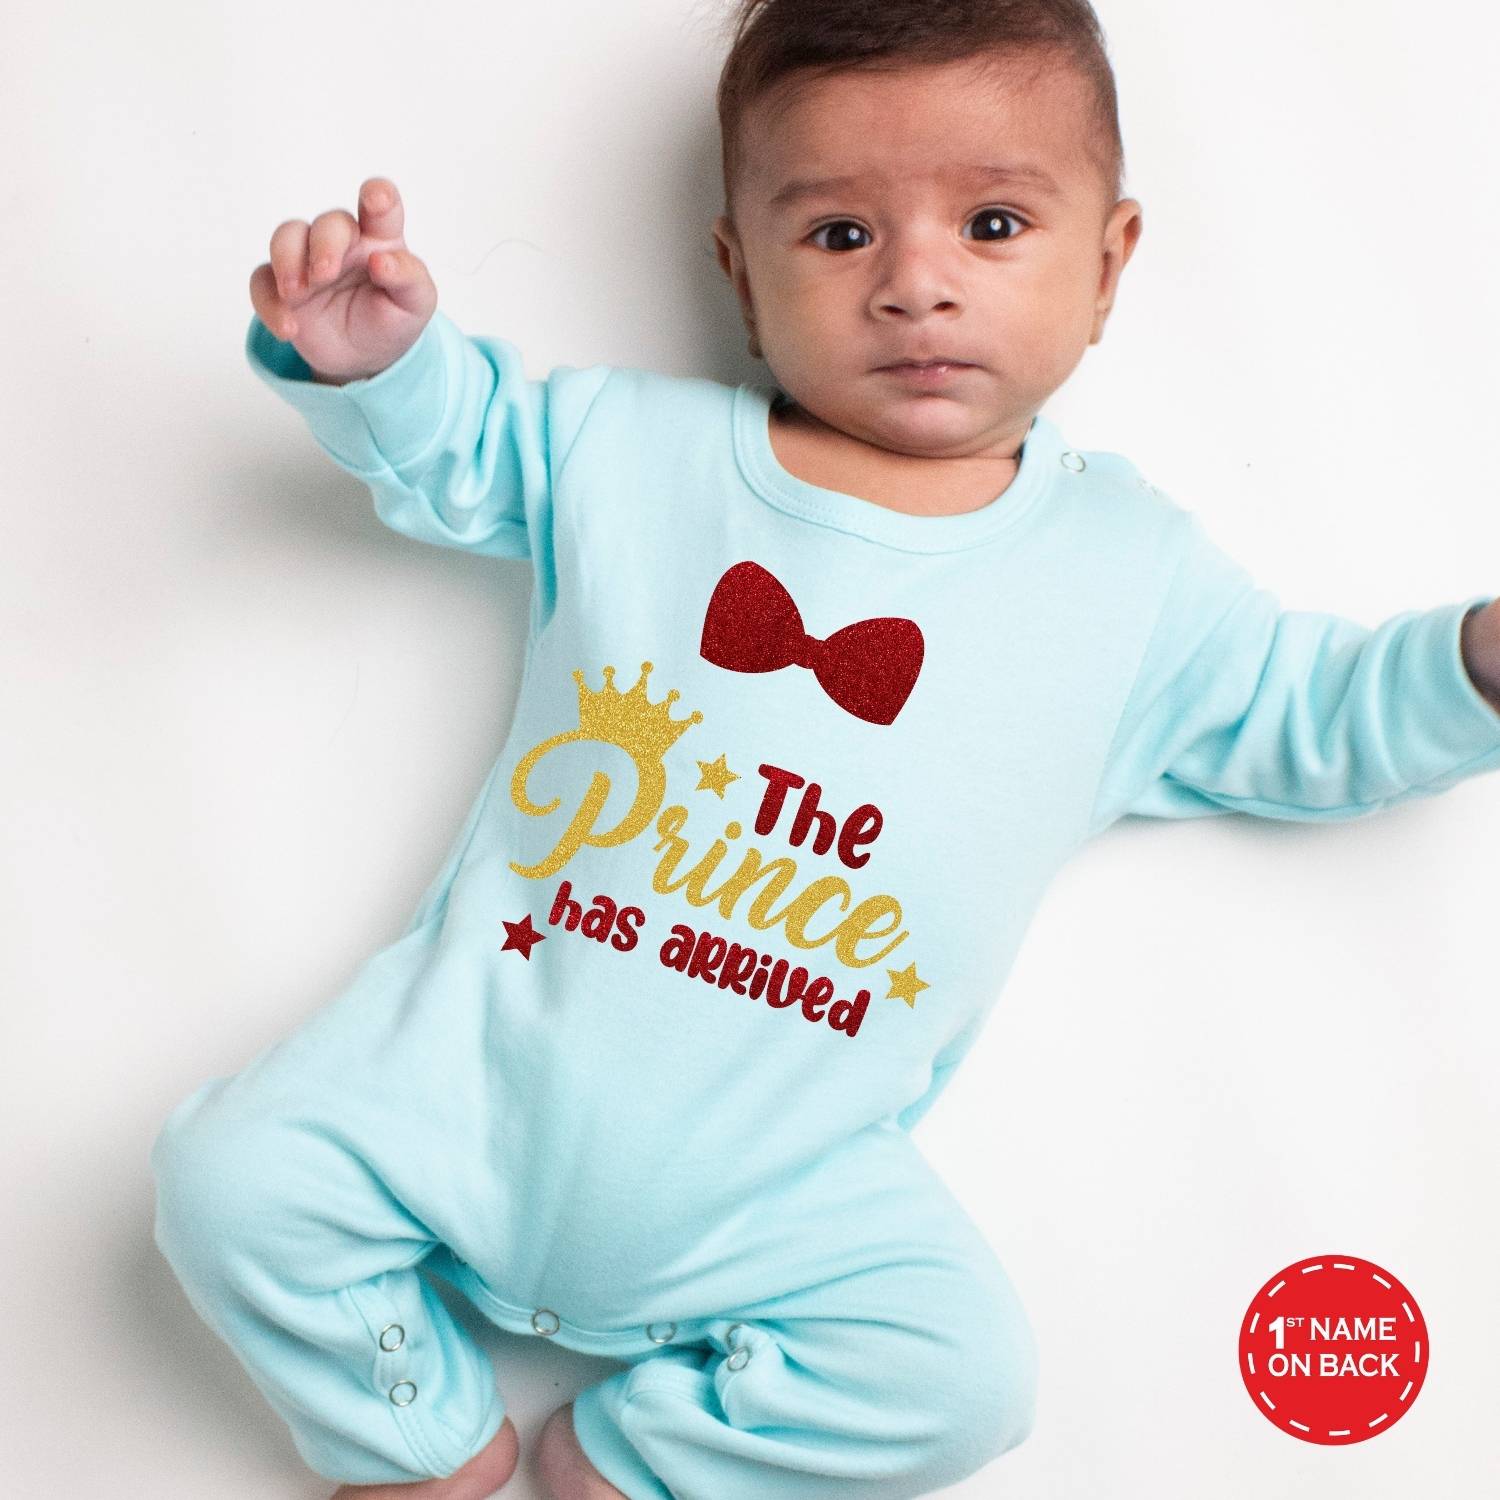 Newborn Clothes For Baby Boy, Customized Baby Clothes